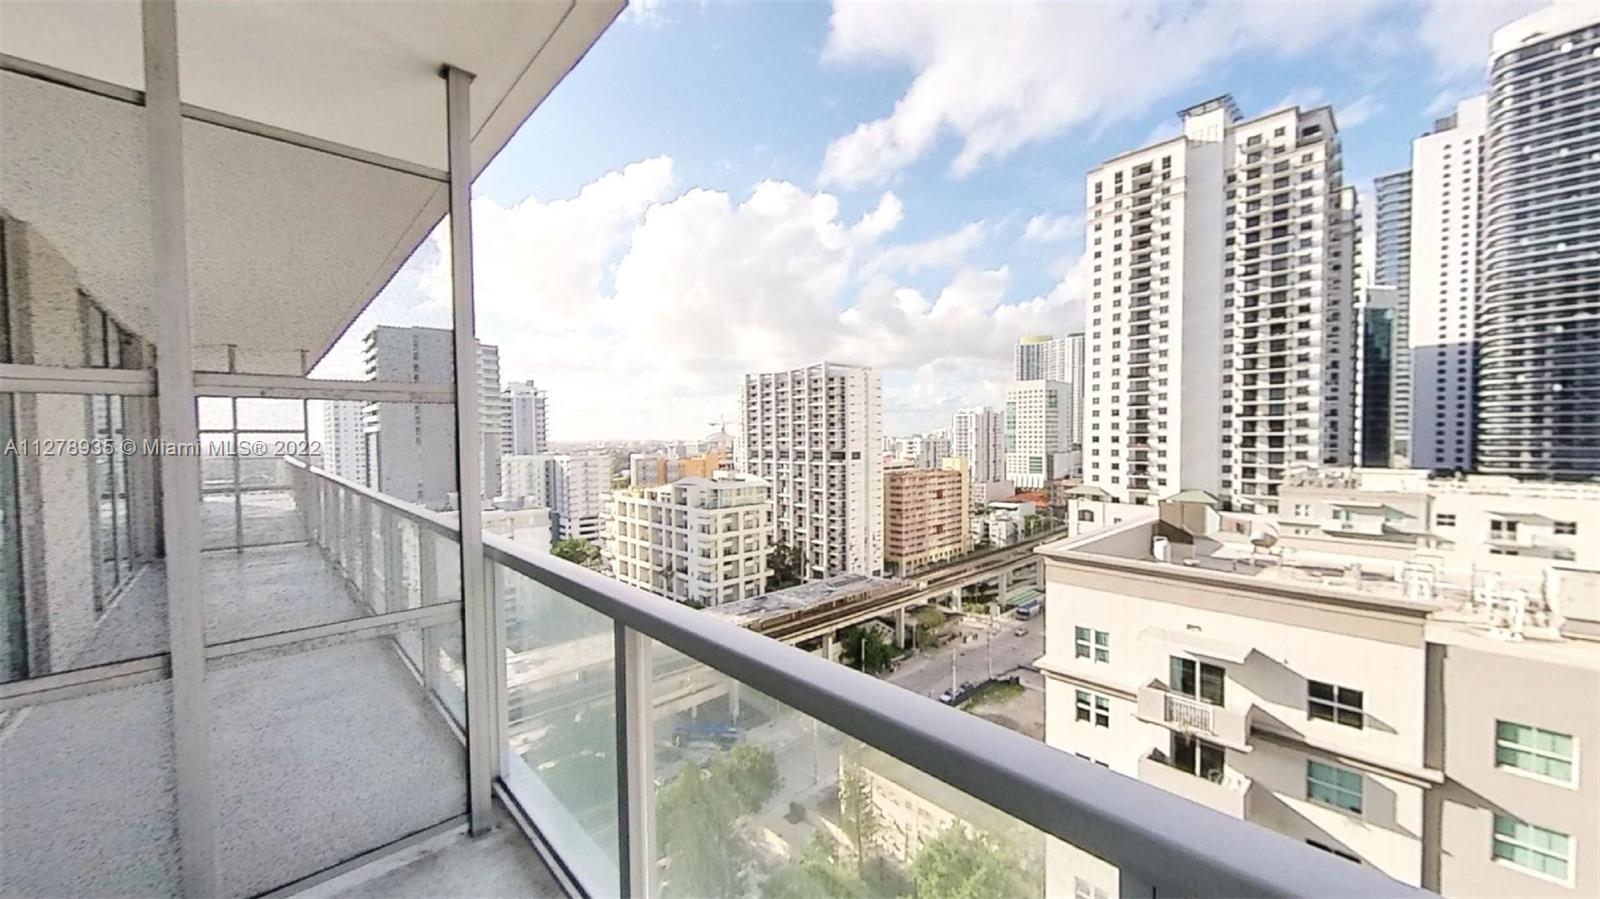 2 bedroom and 2 full baths with in the heart of miami 2 blocks the mall "brickell city center" Fully furnished goodfor 4 people. Equipped with all accessories and 1 king size bed and and 2 full size beds. The unit is rented until May 13, 2023.